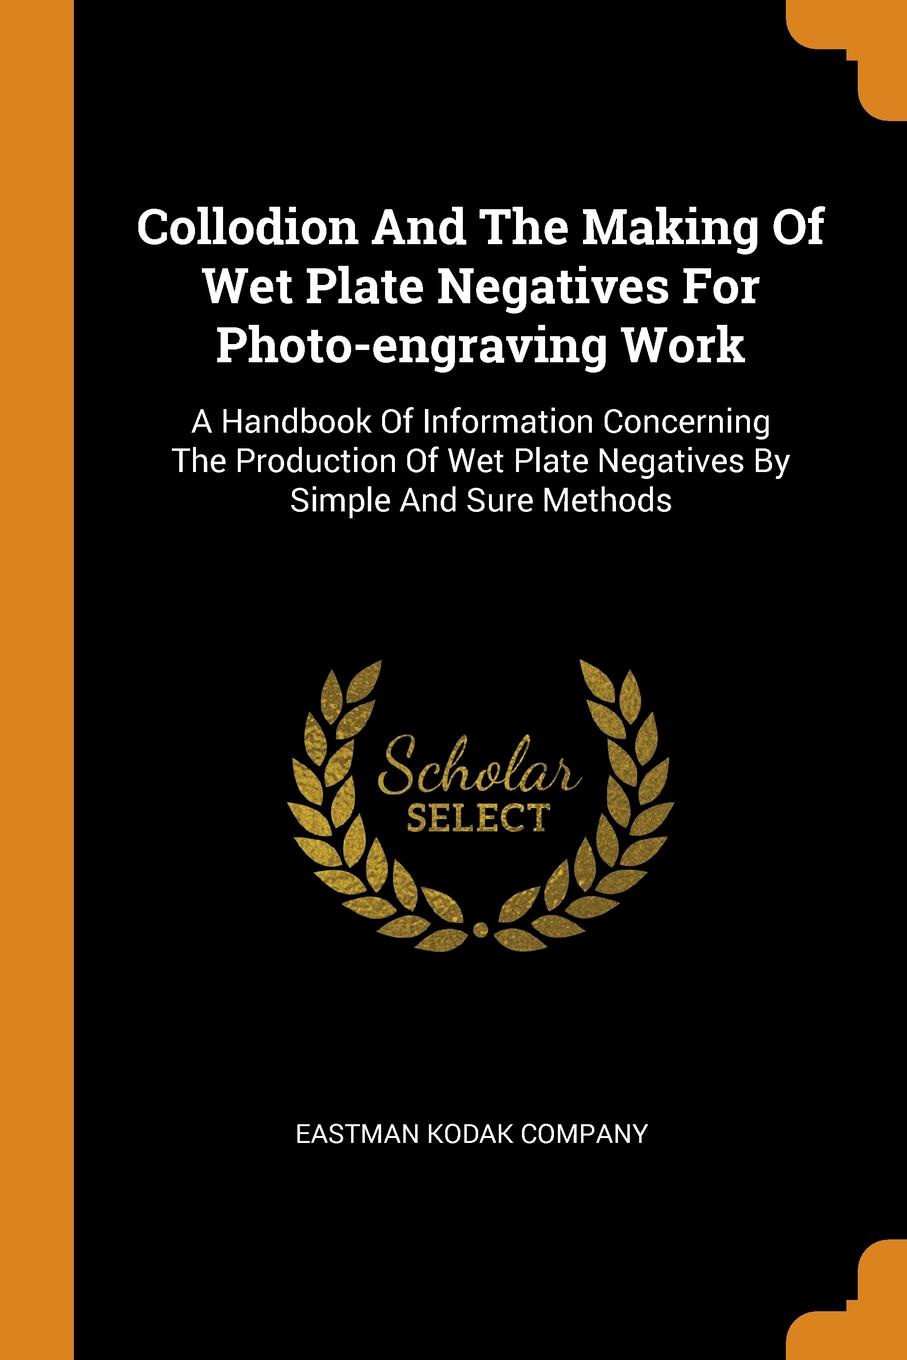 Collodion And The Making Of Wet Plate Negatives For Photo-engraving Work. A Handbook Of Information Concerning The Production Of Wet Plate Negatives By Simple And Sure Methods